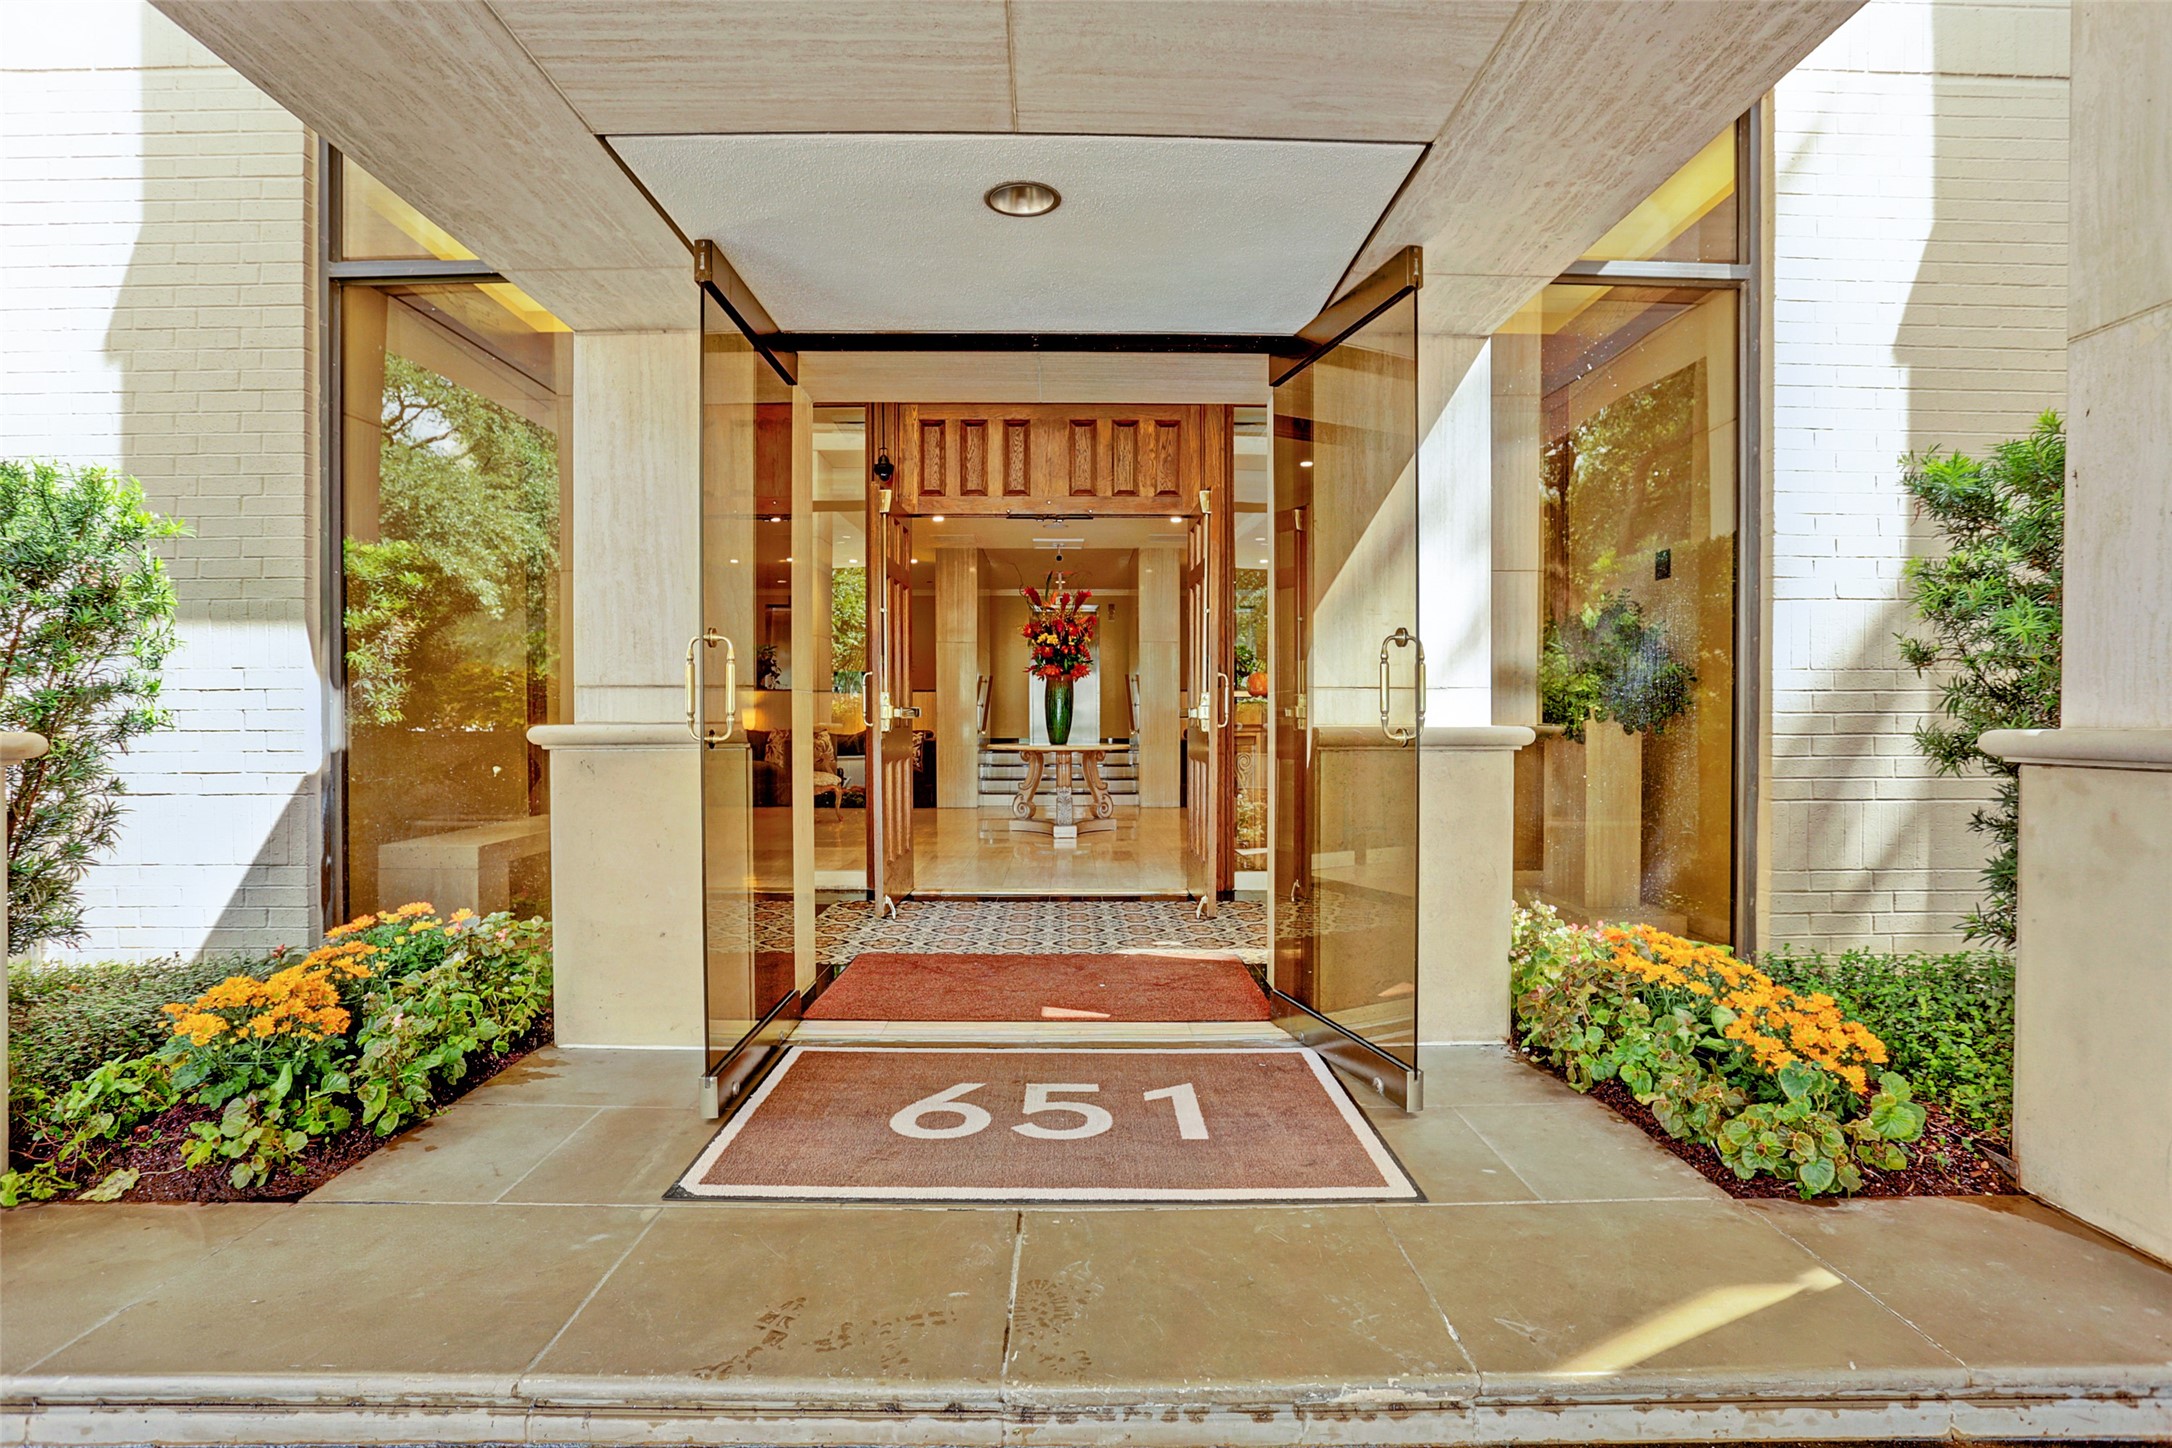 FRONT ENTRANCE TO LOBBY